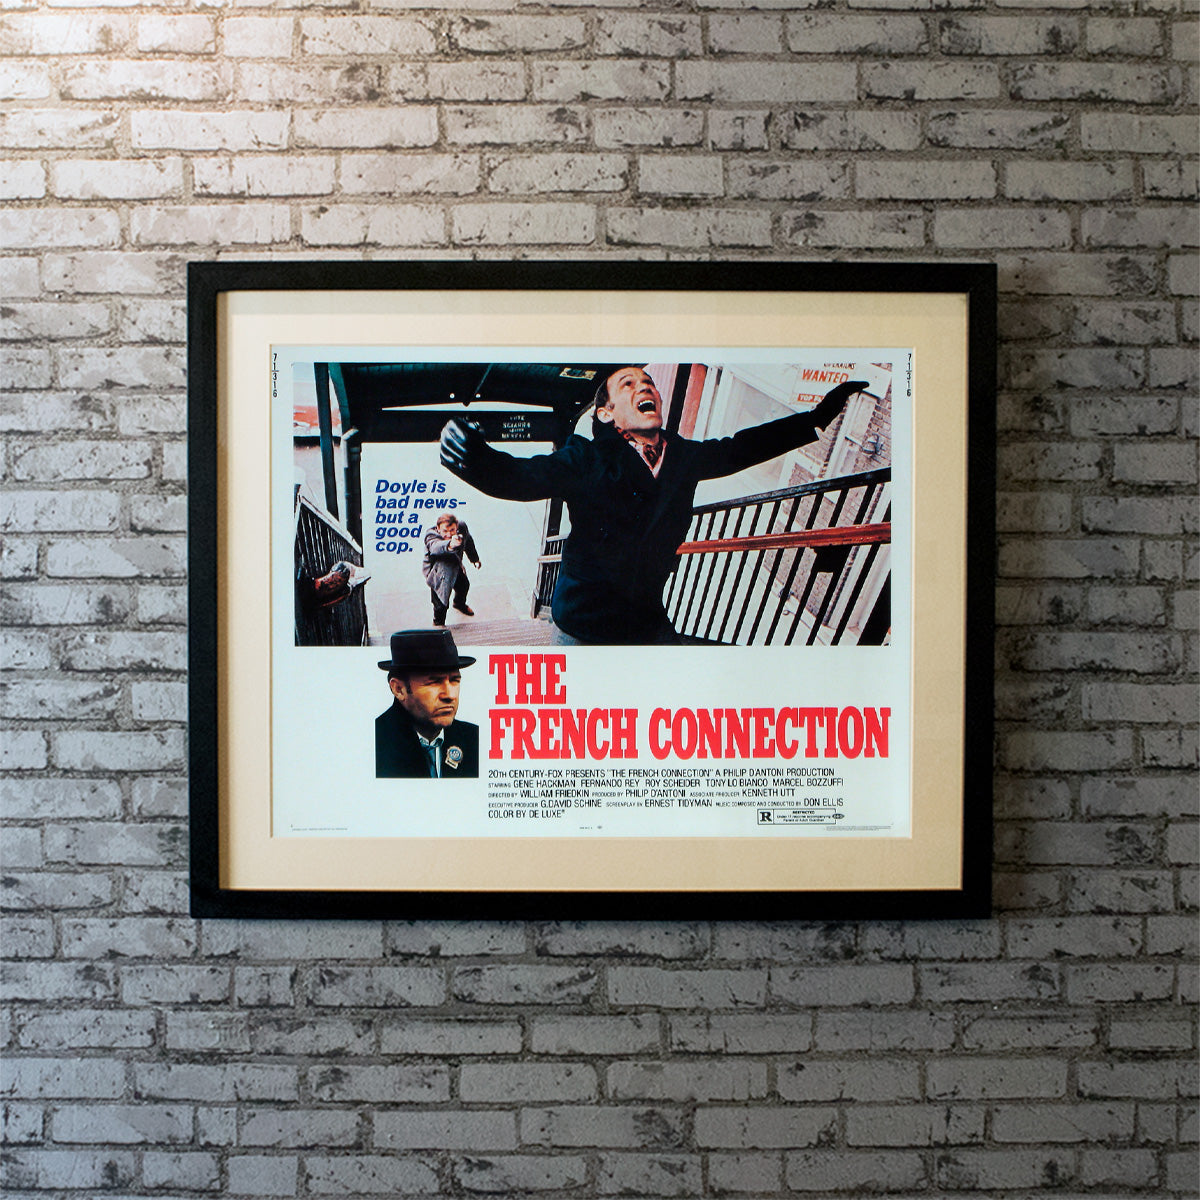 French Connection, The (1971)